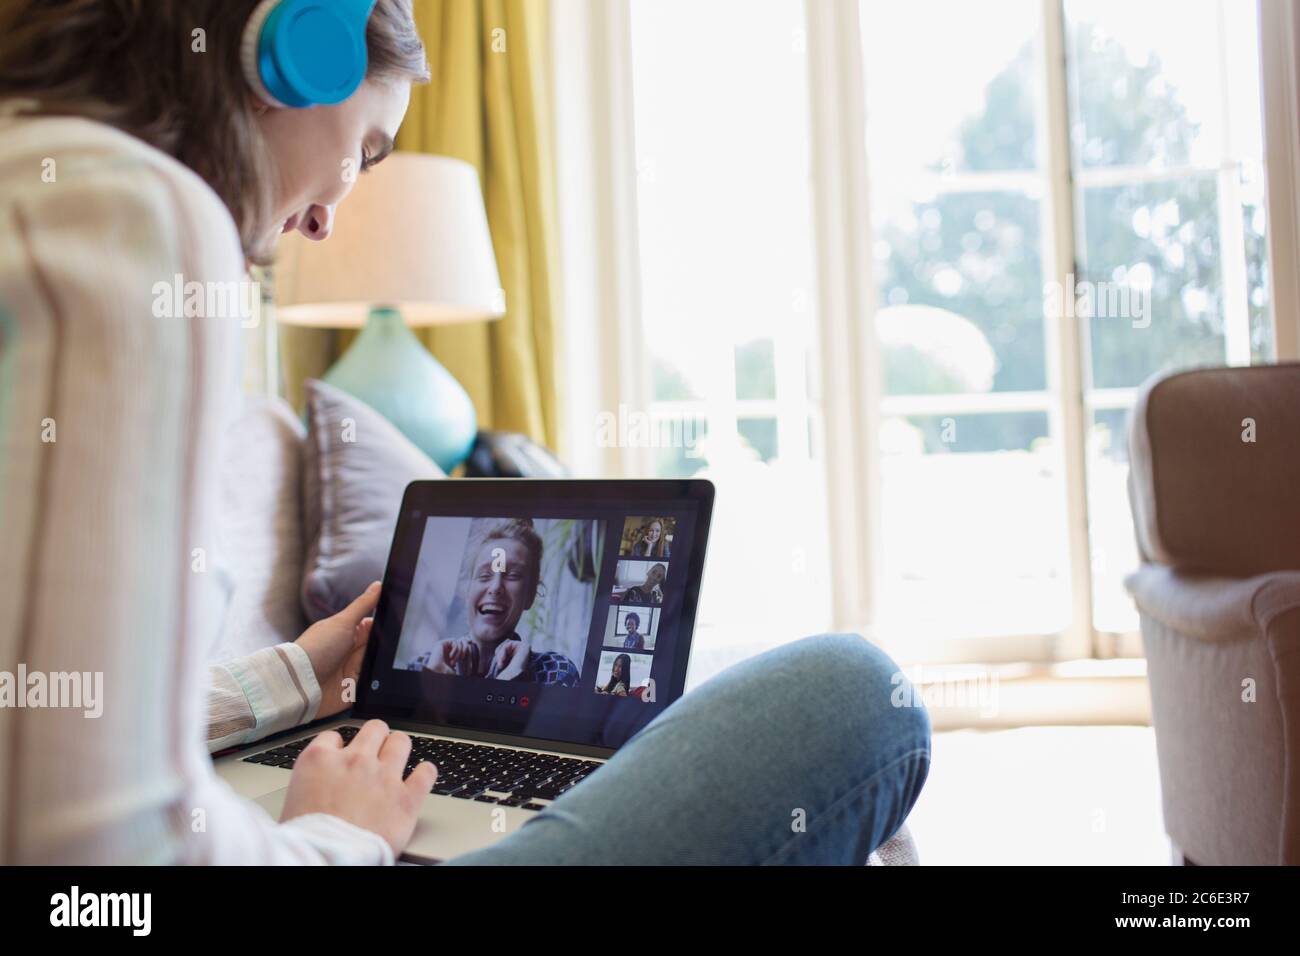 Teenage girl with headphones and laptop video chatting with friends Stock Photo